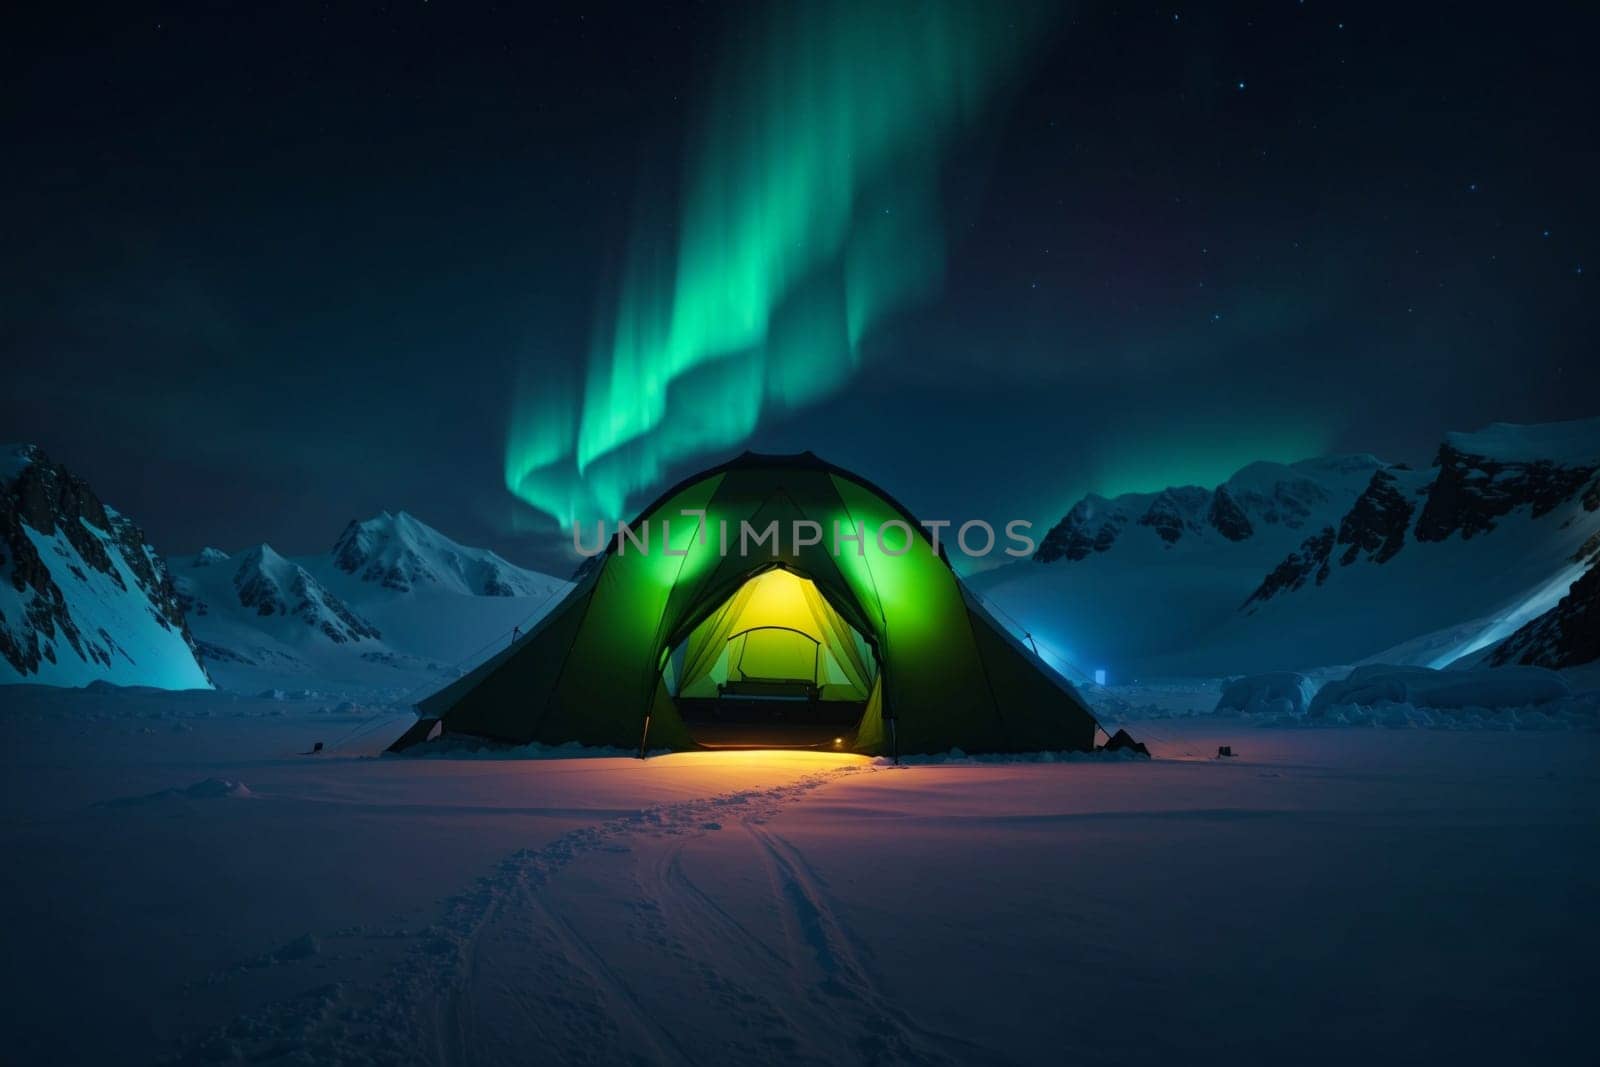 A lone tent stands in the middle of a snowy field, providing refuge in the midst of a wintry scene.